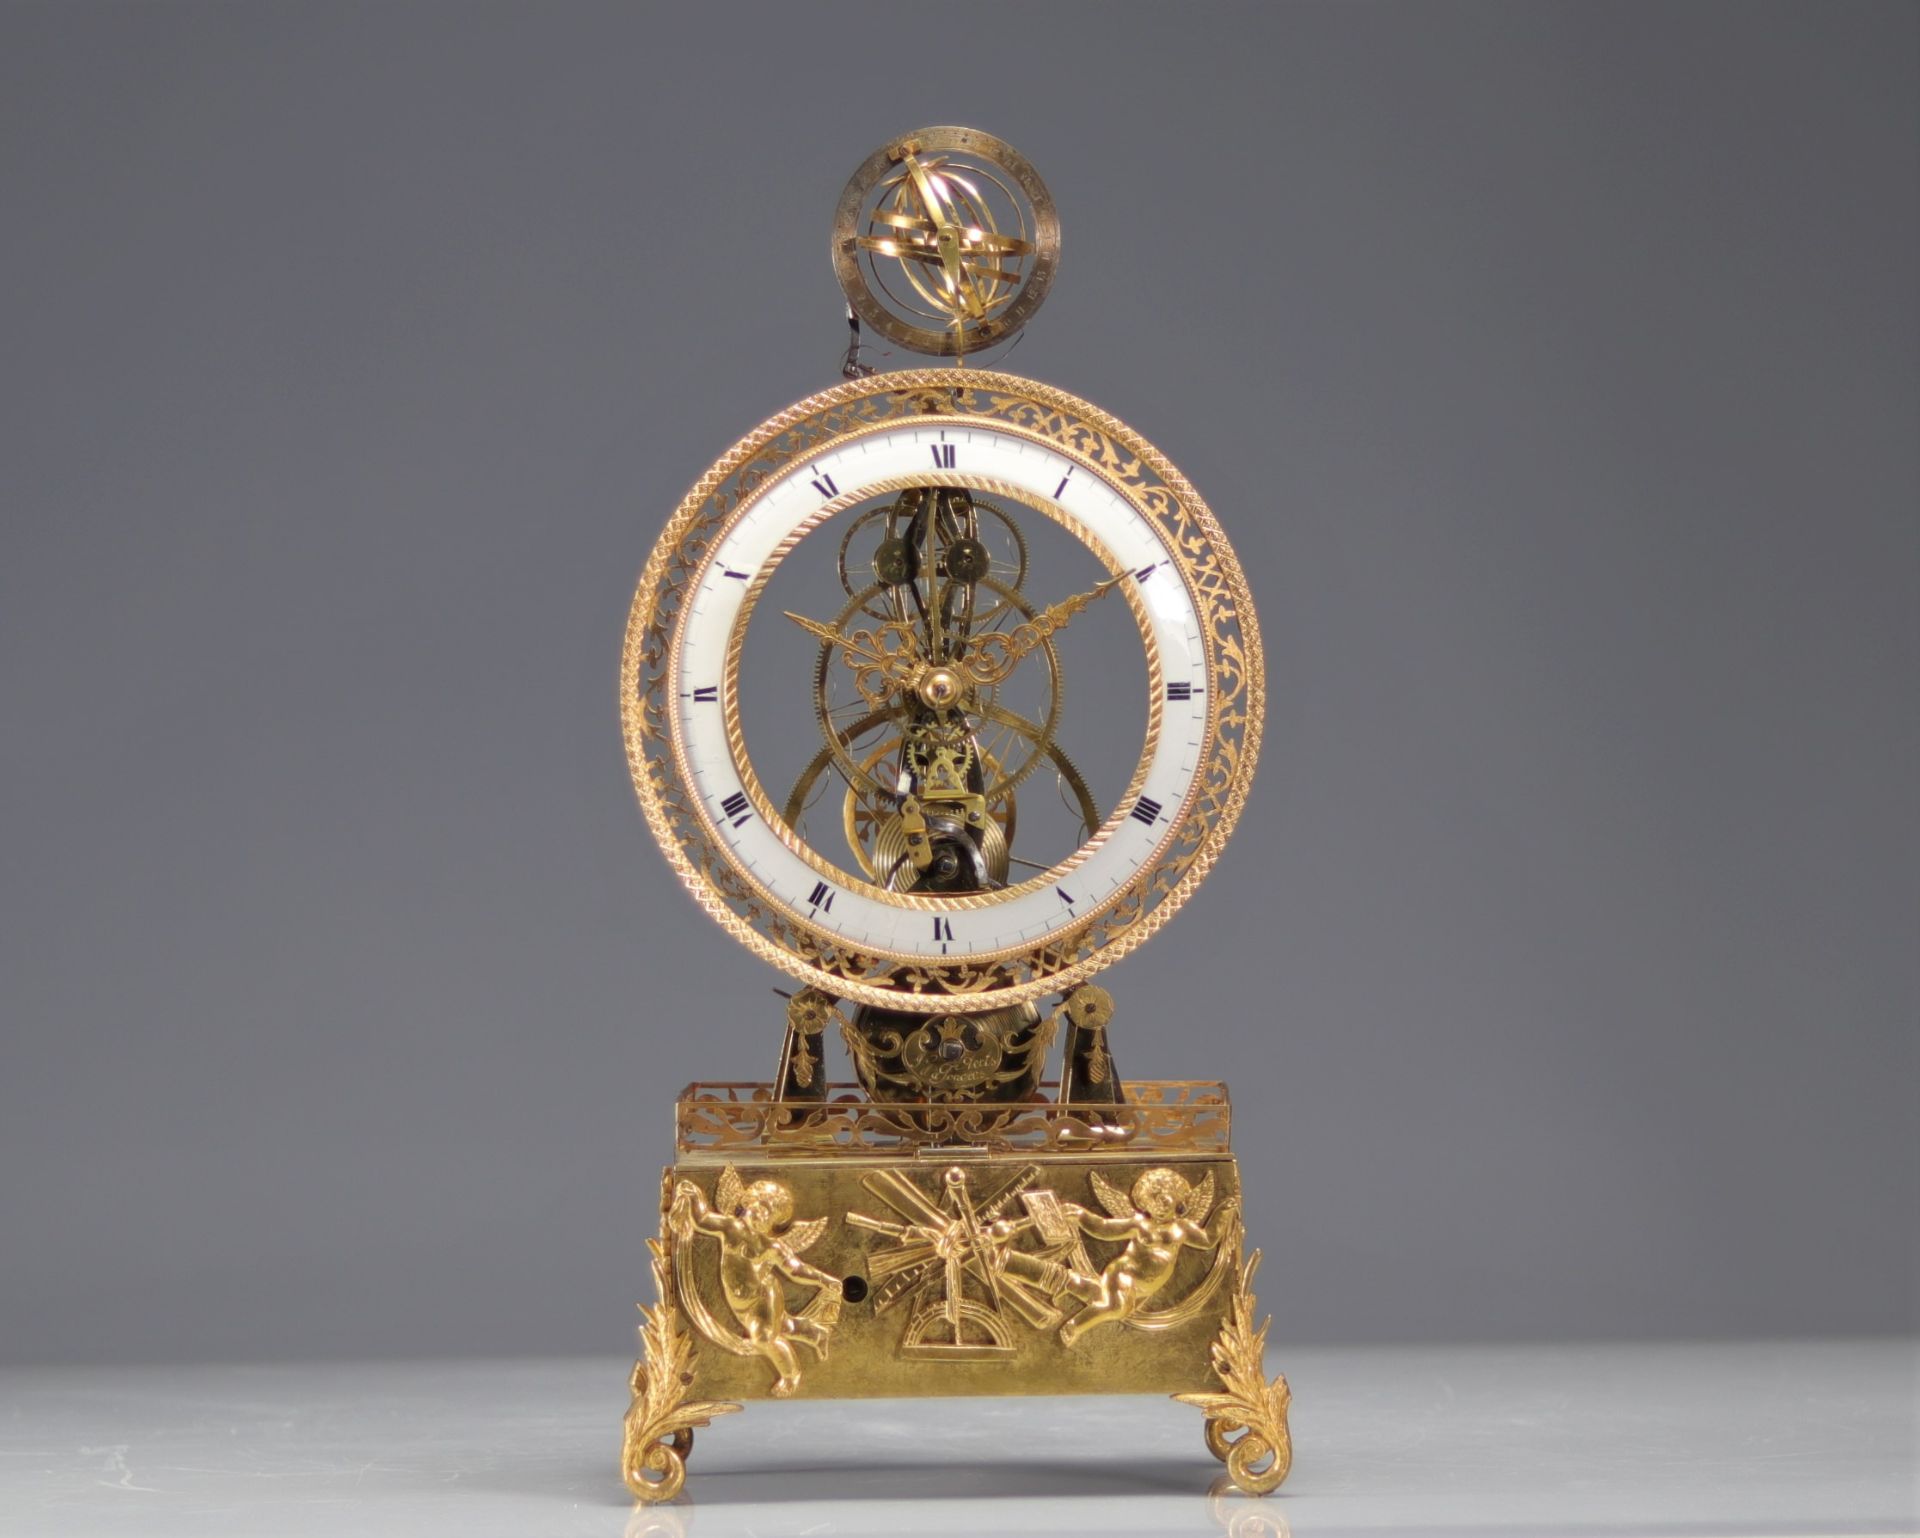 Rare skeleton clock with movement of the stars signed Aerts in Tongres - Image 8 of 8